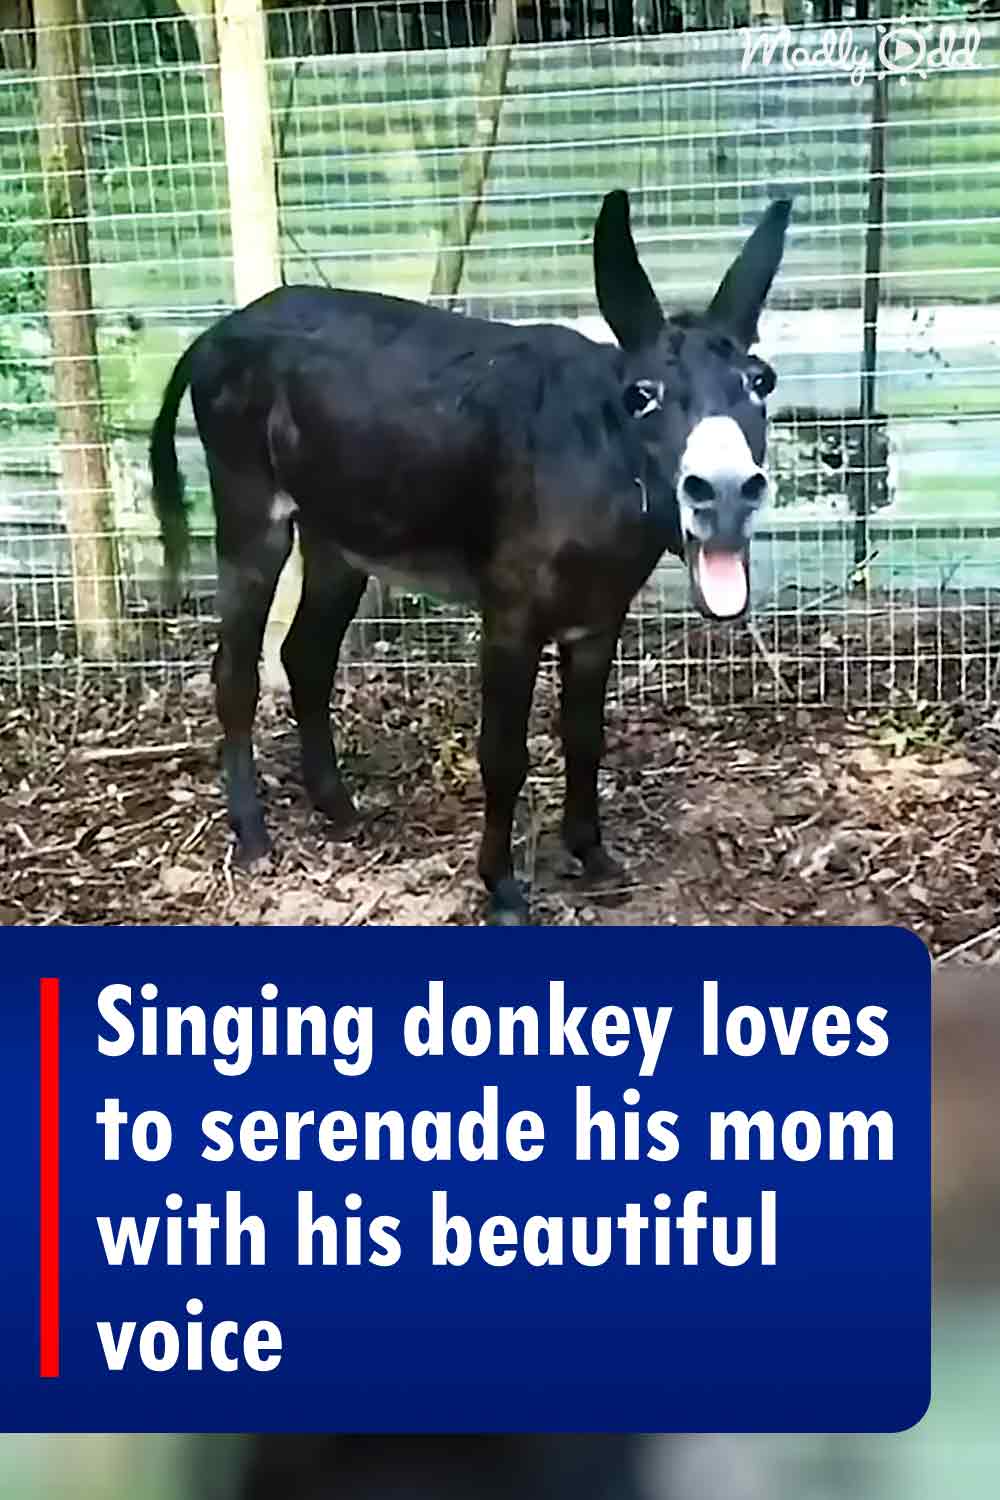 Singing donkey loves to serenade his mom with his beautiful voice